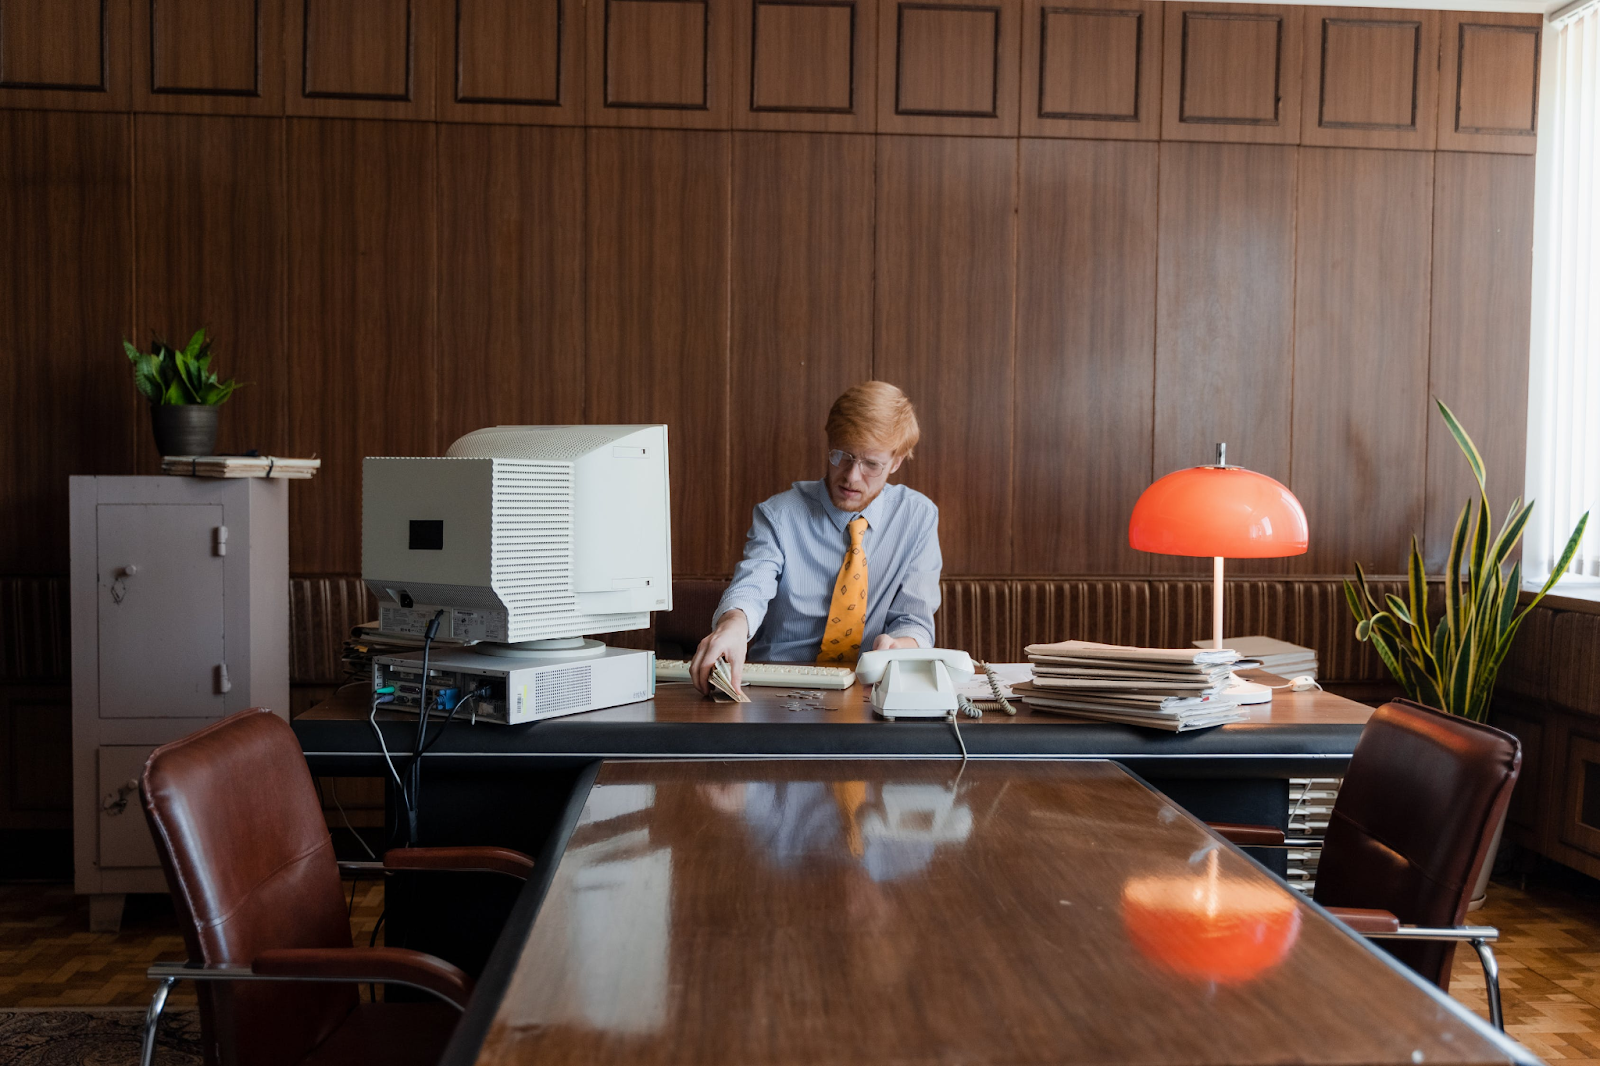 Man at desk with old computer